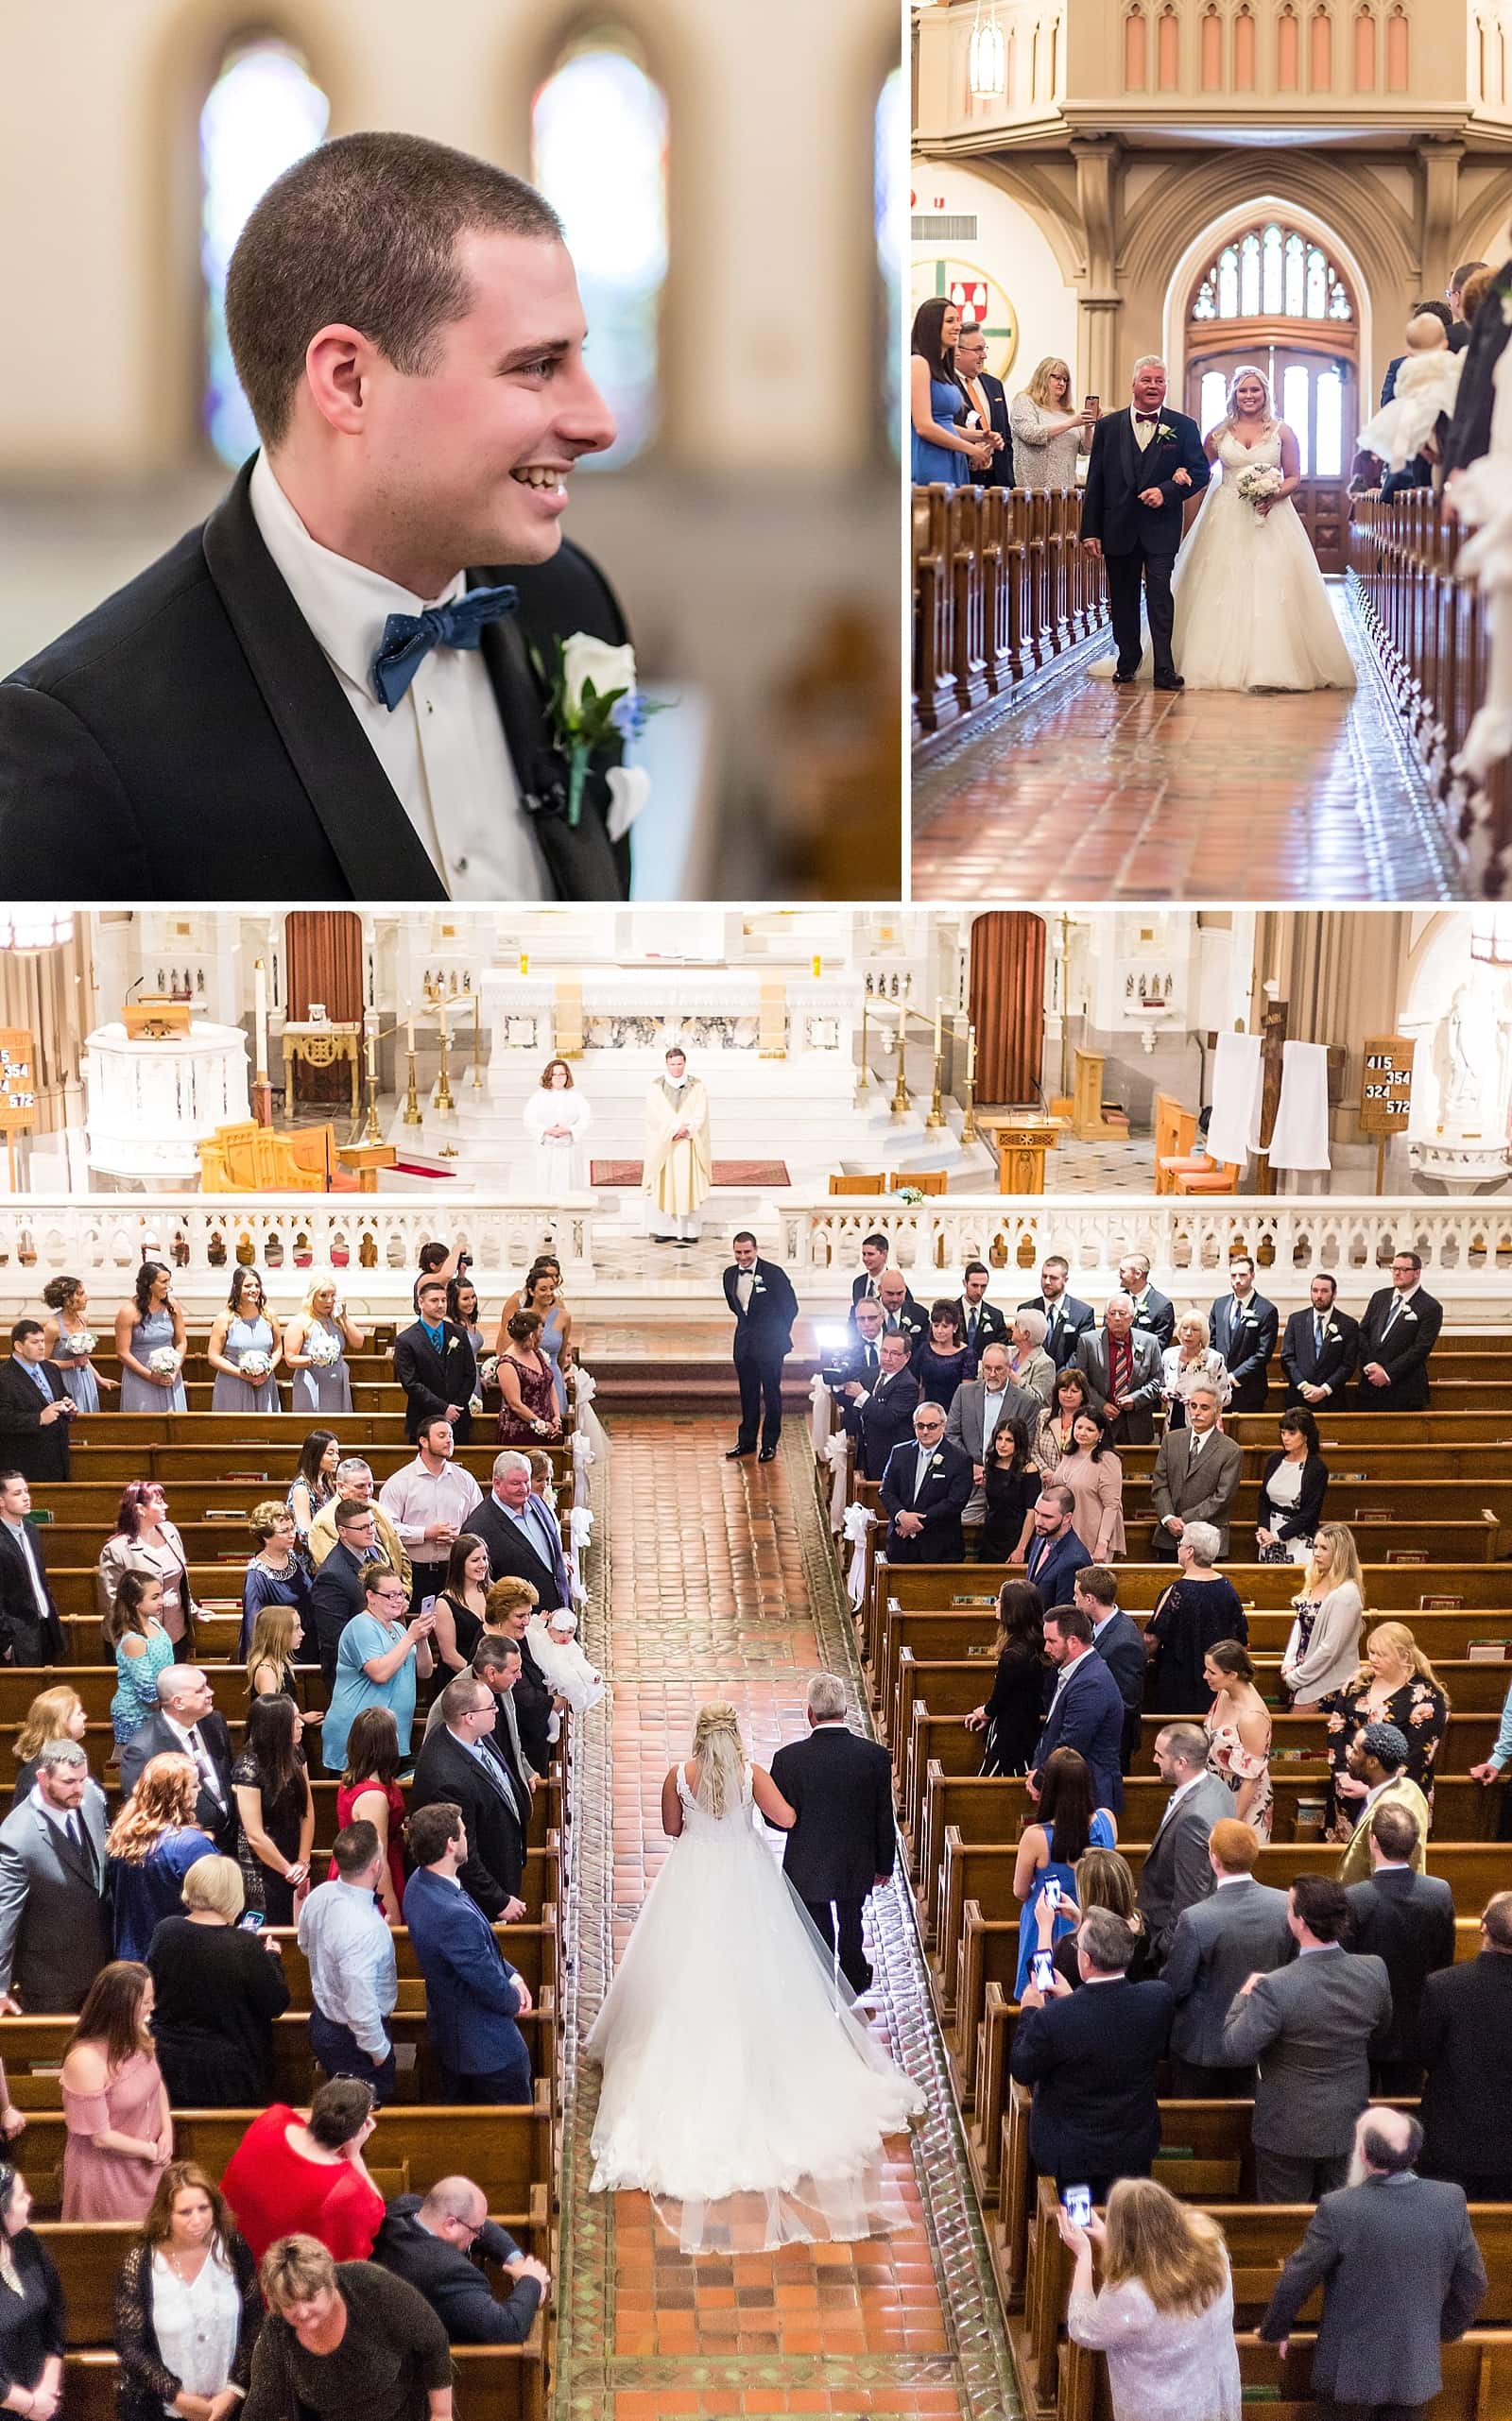 Bride & her father walking down the aisle during a catholic wedding mass at St Matthew's Church in Conshohocken.